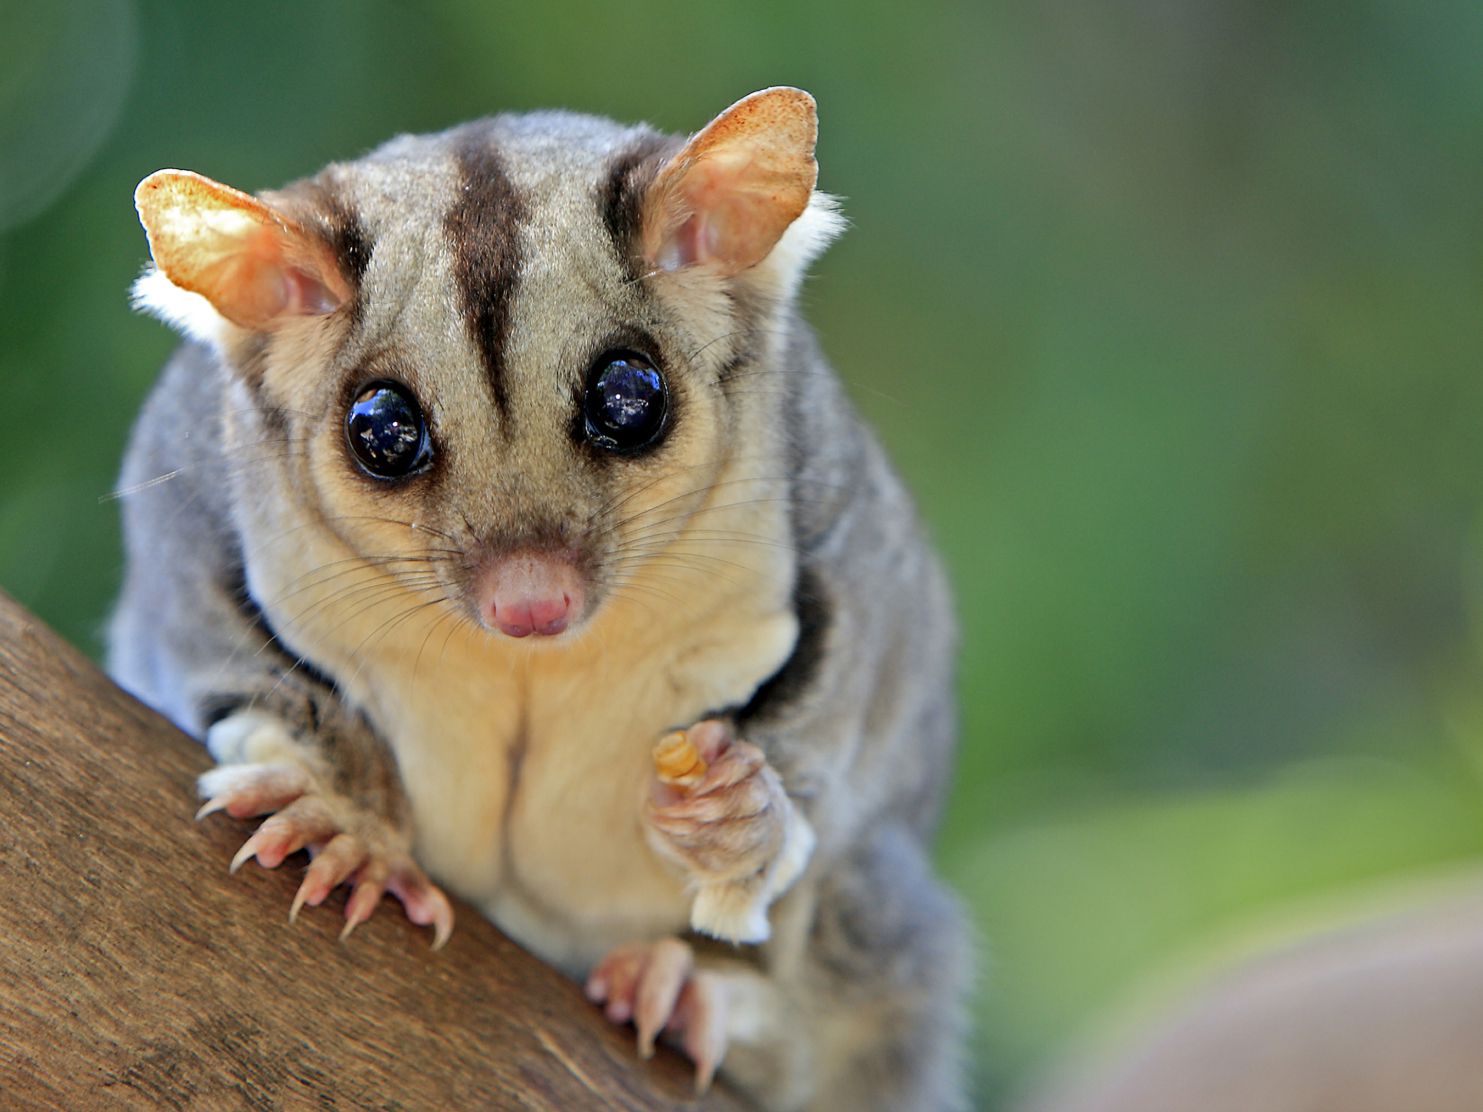 Can you keep 1 sugar gliders as pets?